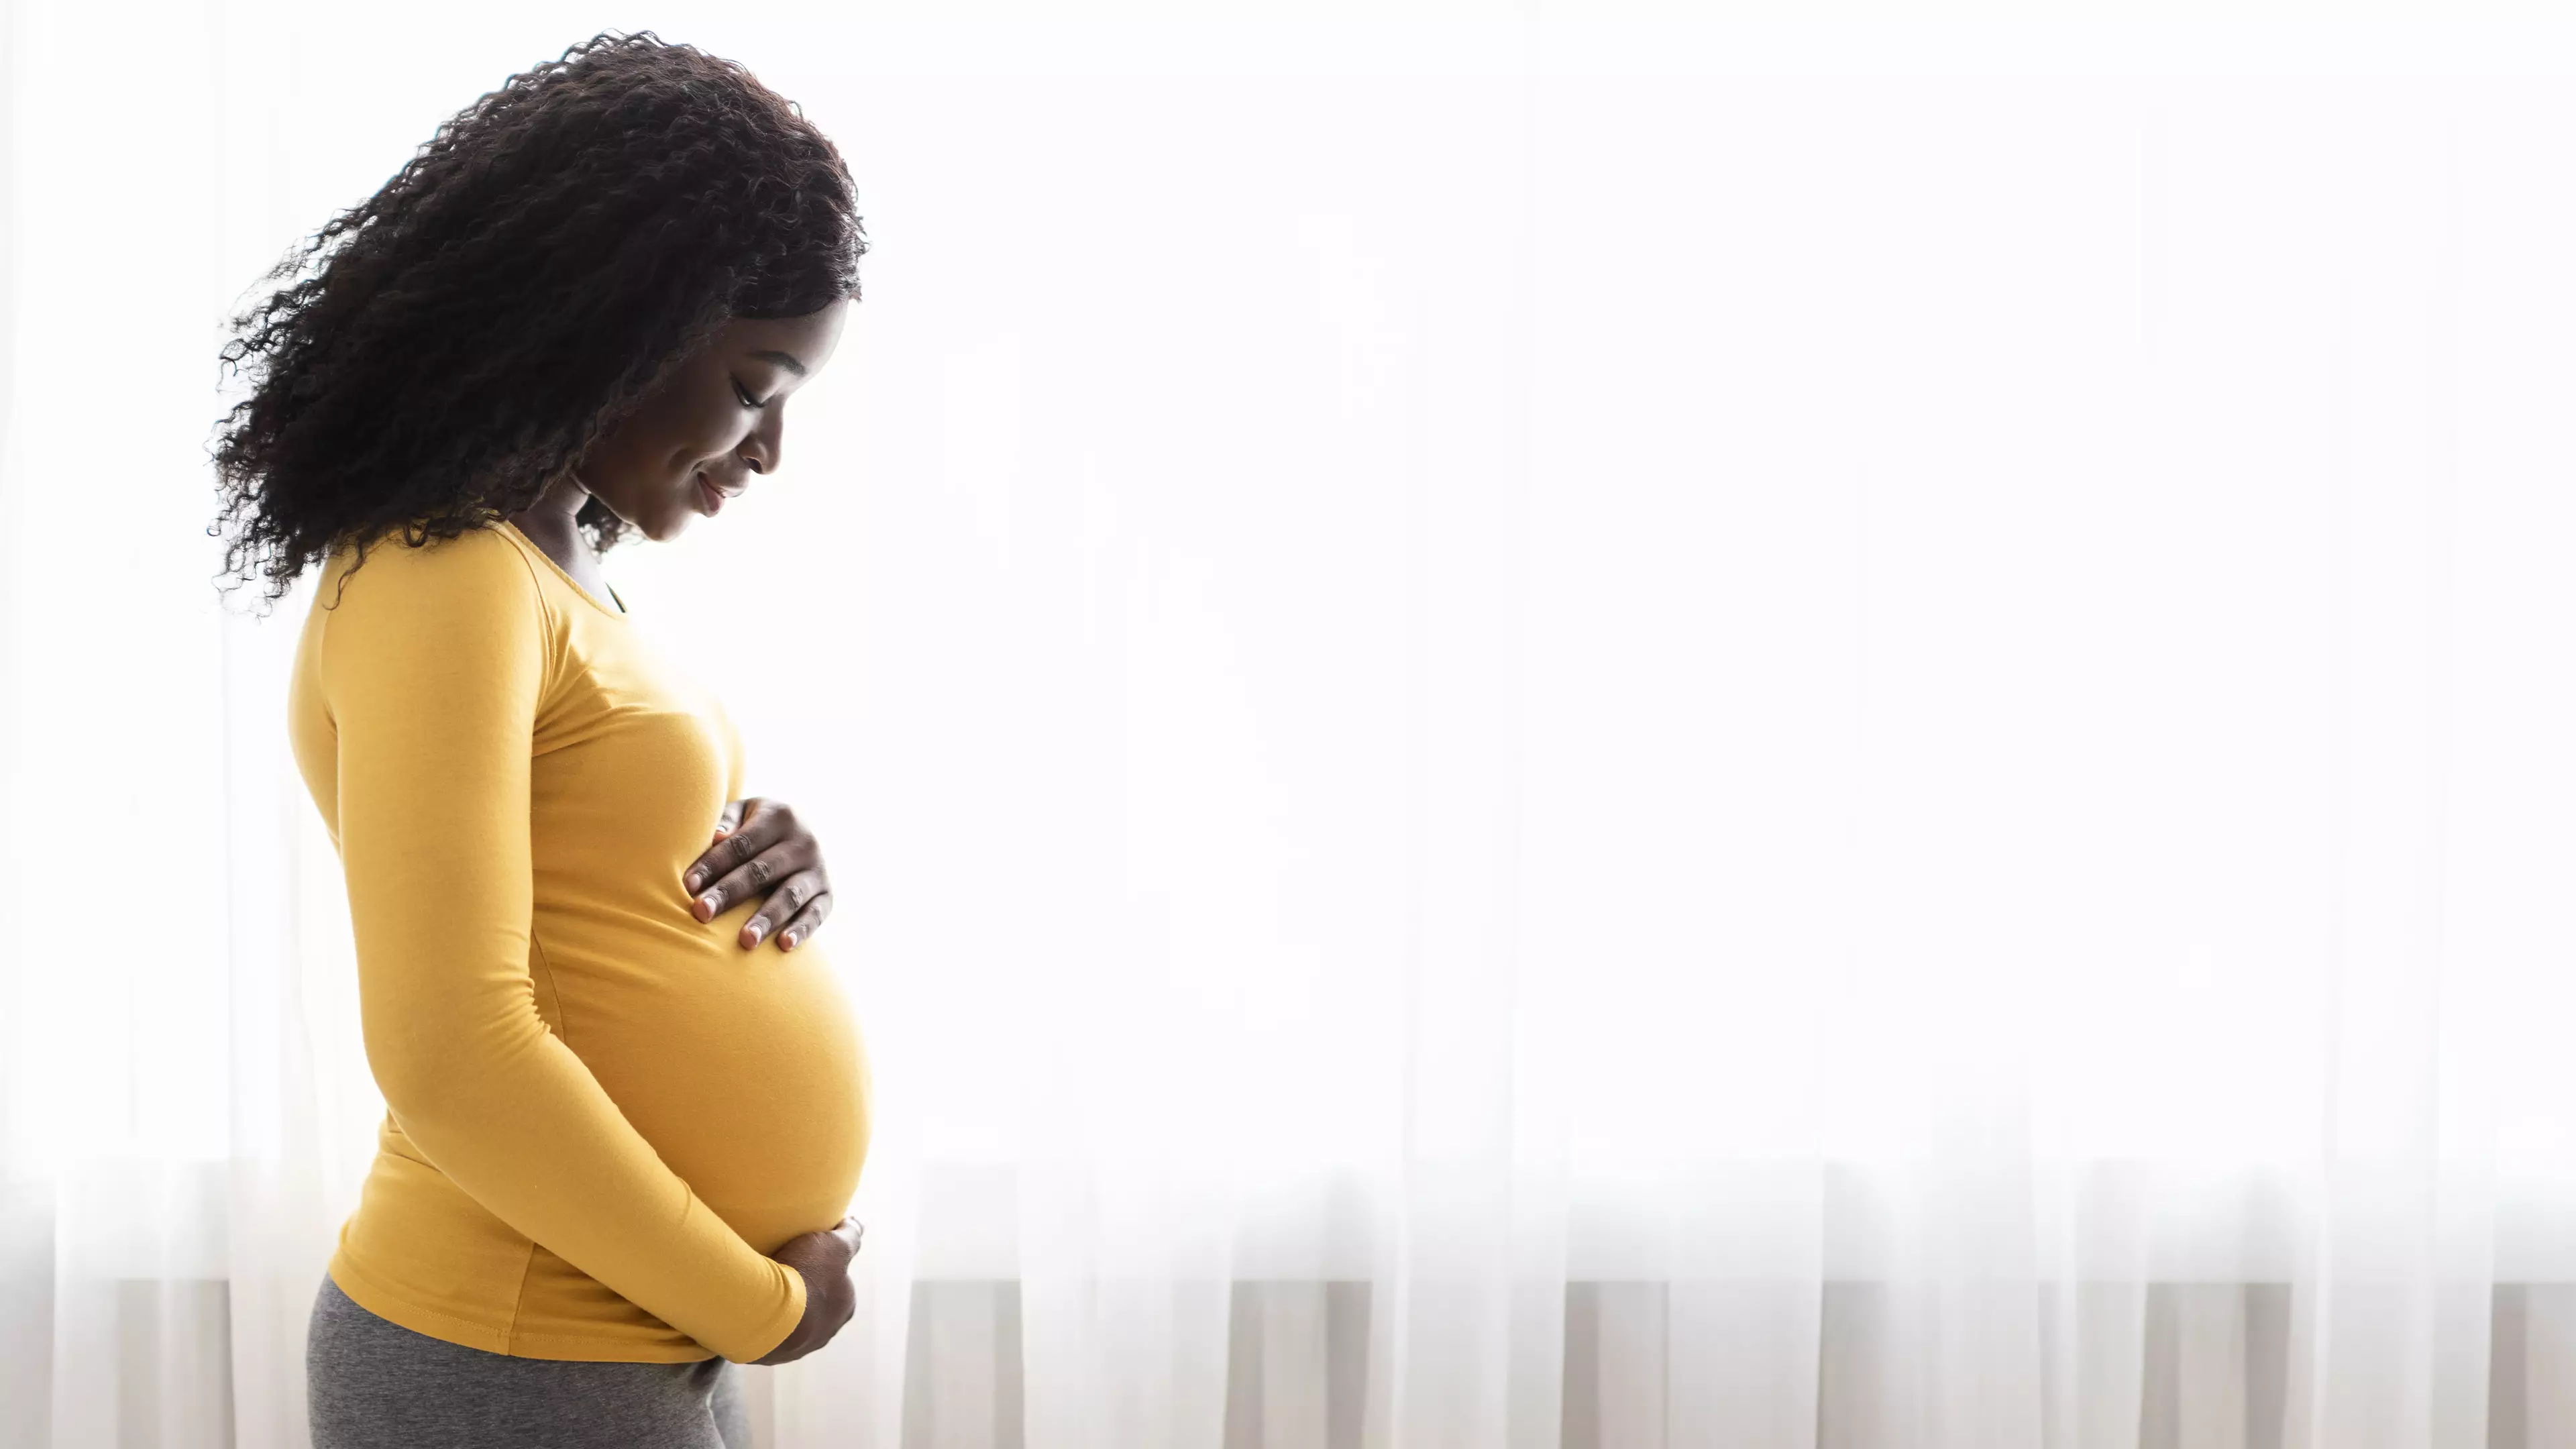 New Guidelines To Induce Black Pregnant Women At 39 Weeks Heavily Criticised